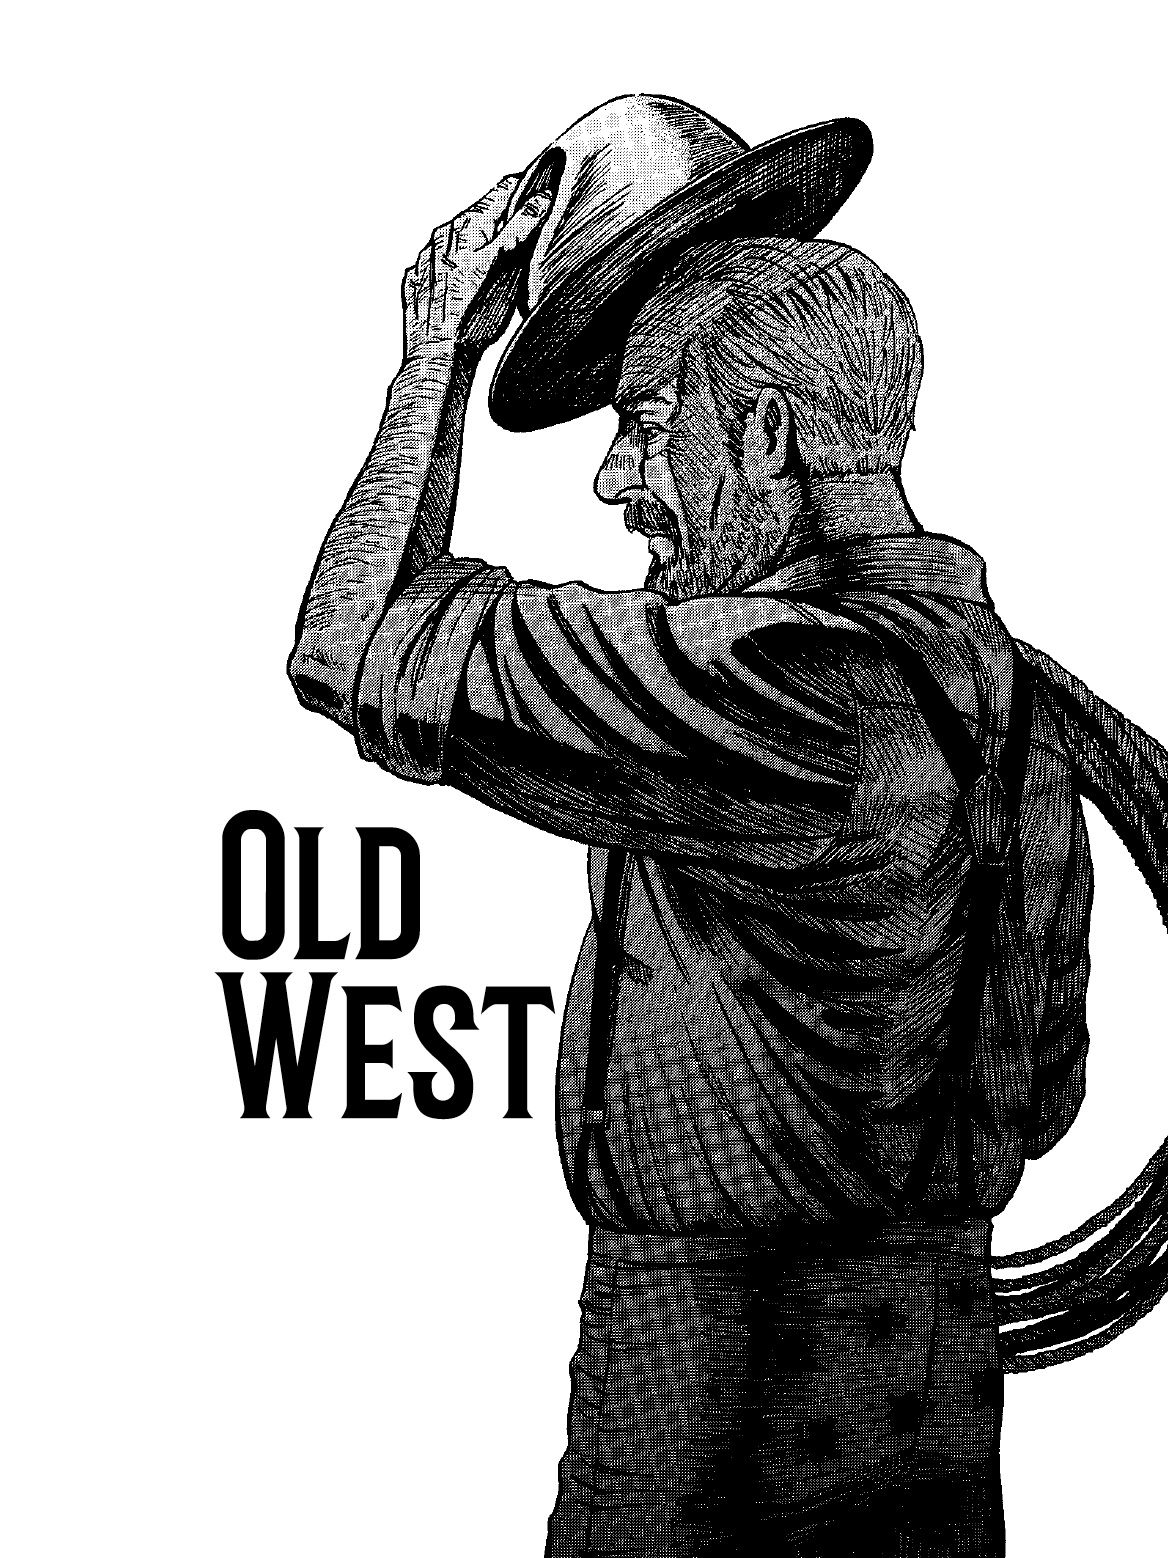 Old west visual 1